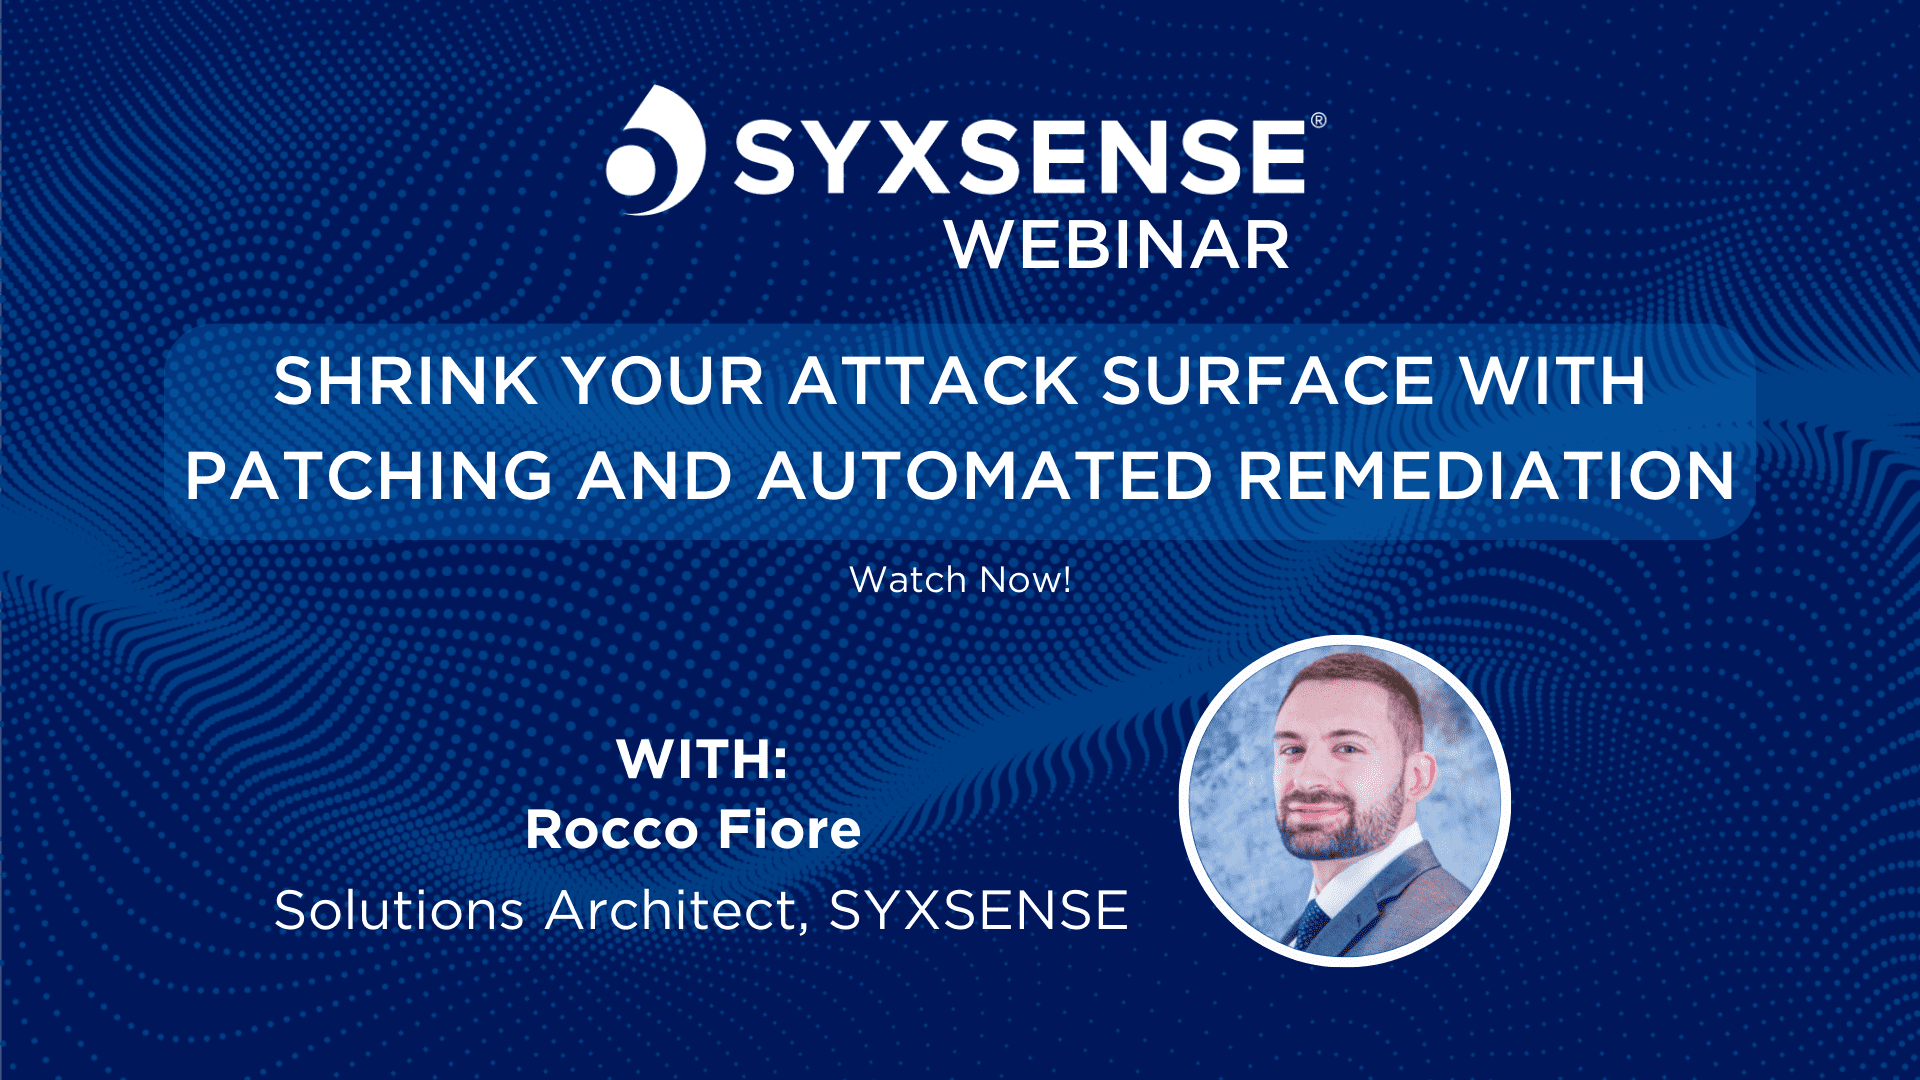 Shrink Your Attack Surface with Patching and Automated Remediation